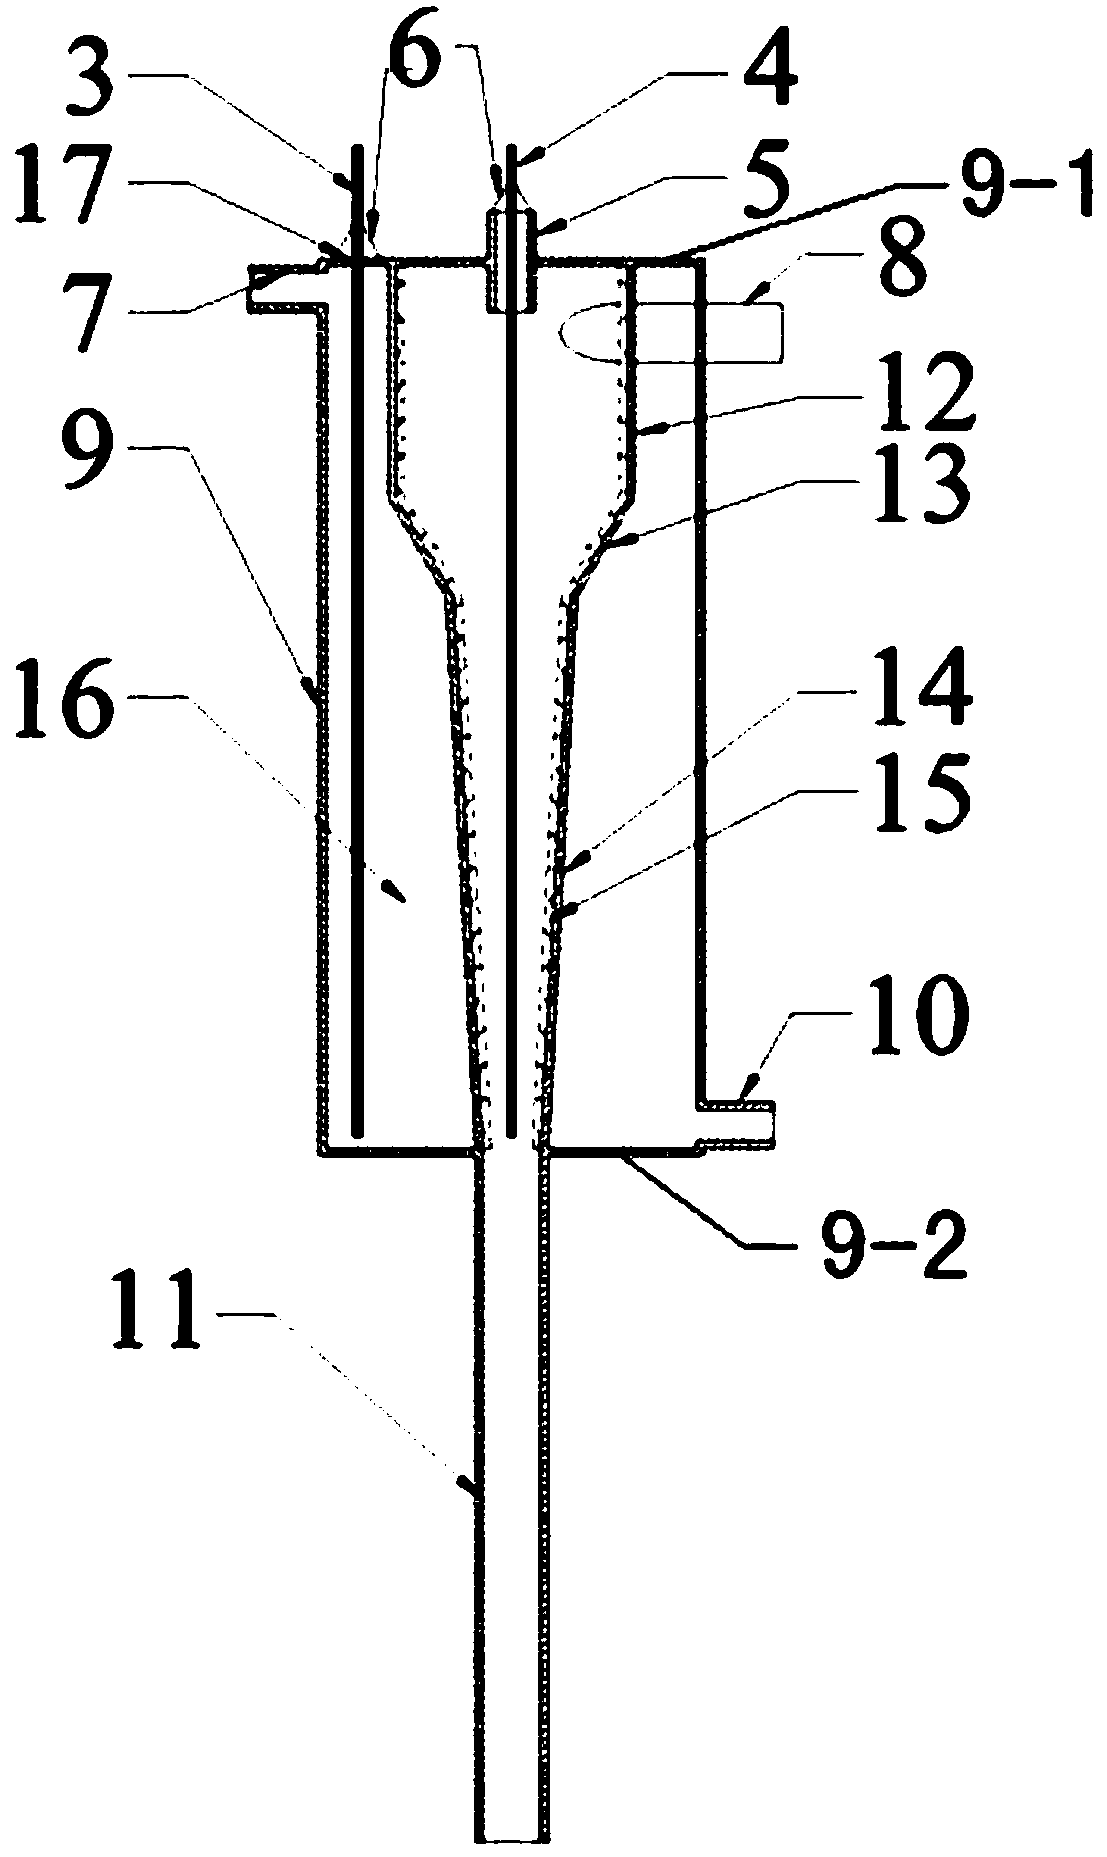 Static rotational flow emulsion-breaking device and application thereof